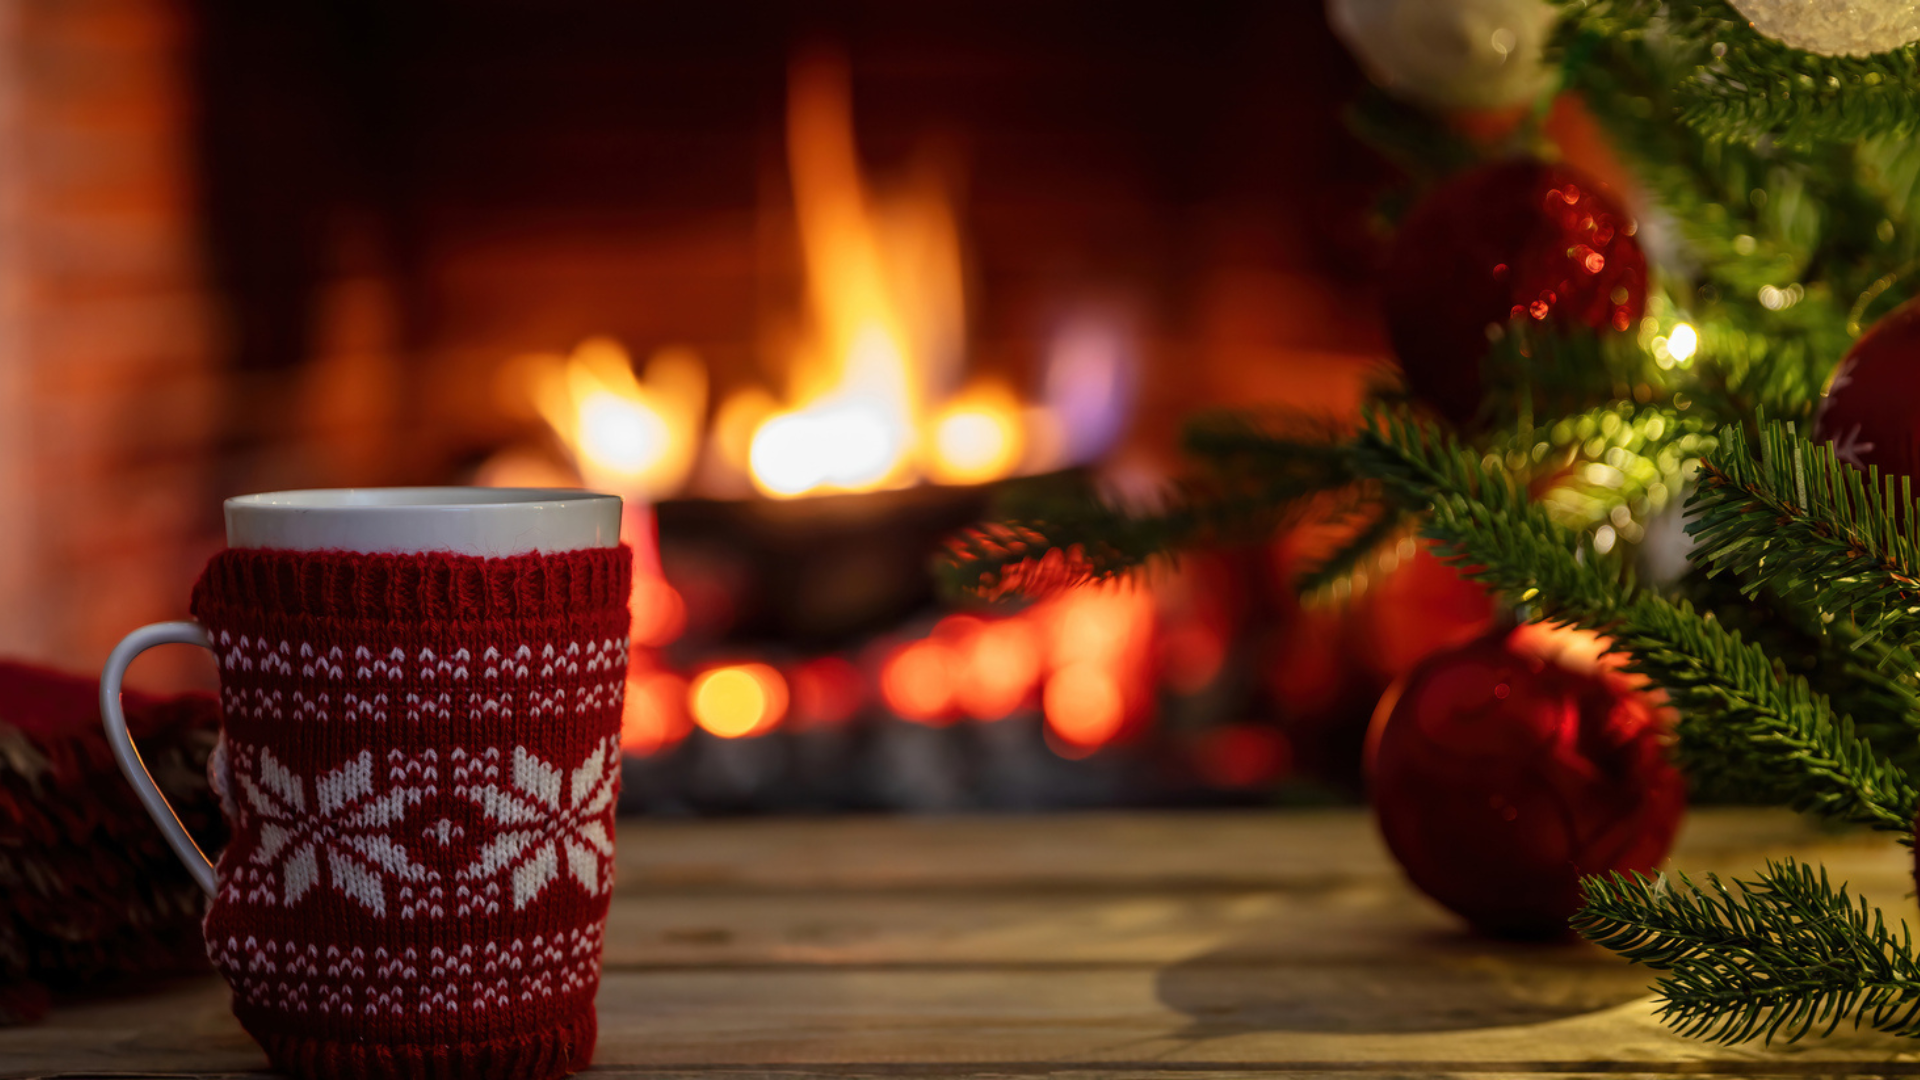 hot-chocolate-cup-burning-fireplace-background-christmas-tree-decoration-relaxation-by-fire.jpg